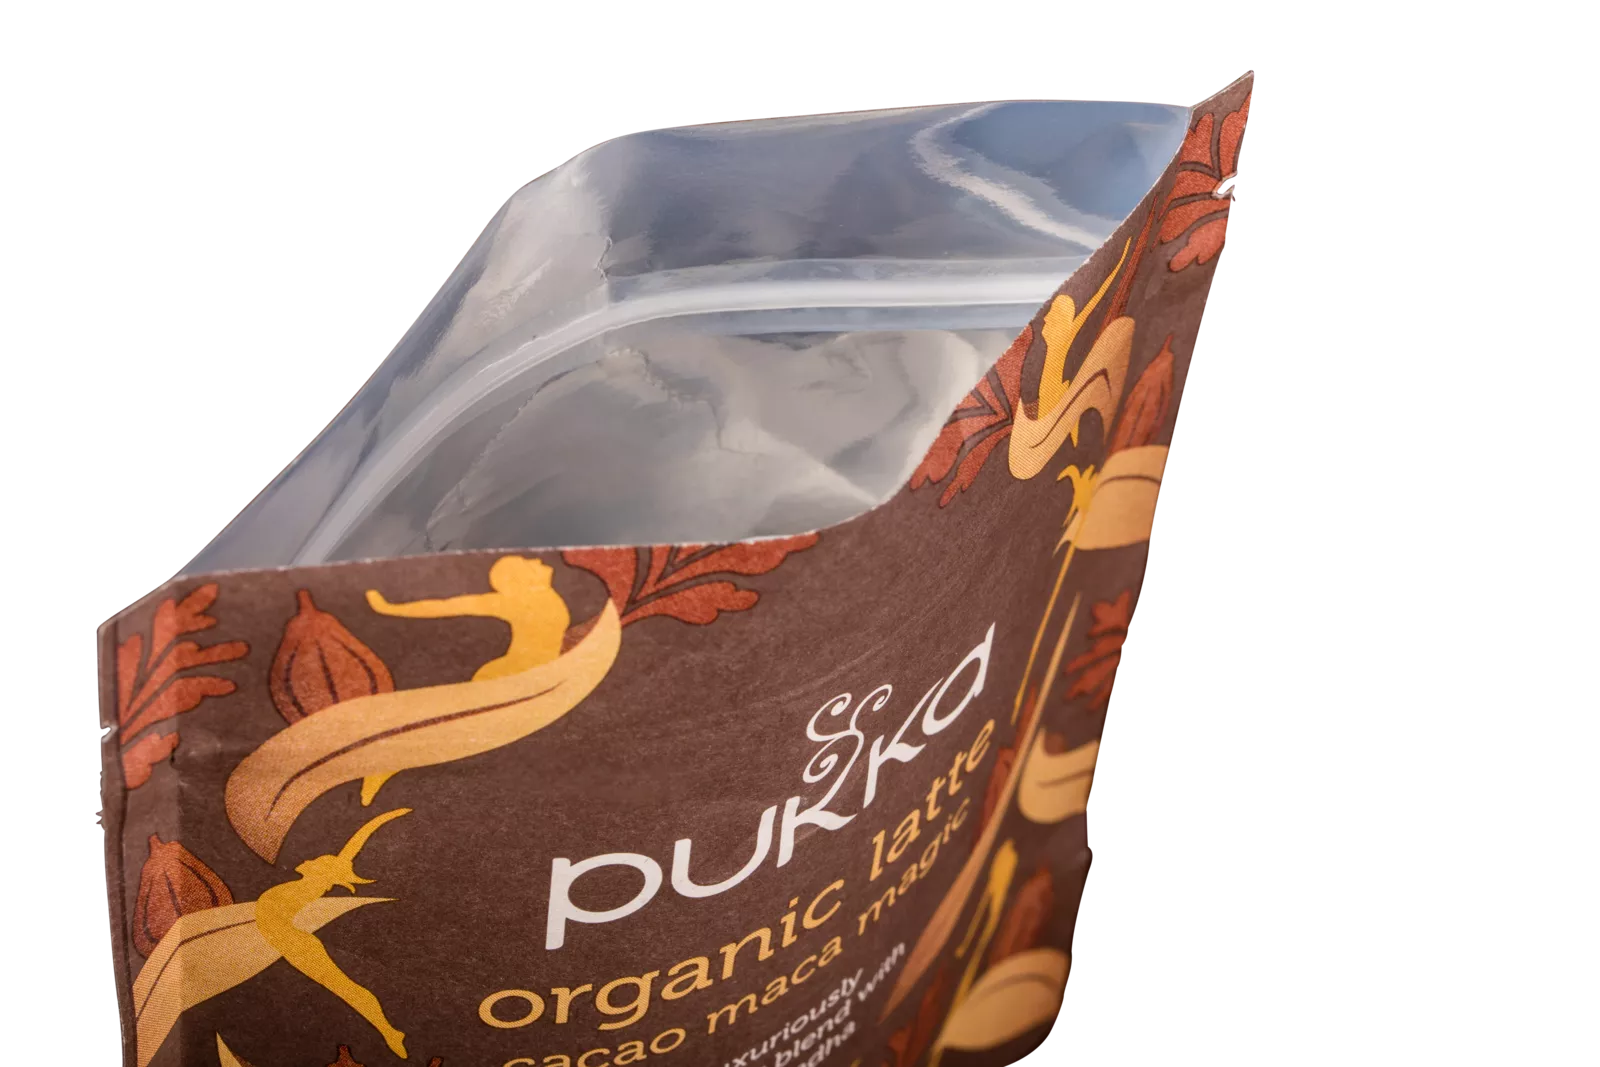 PaperWise sustainable paperorganic board pouch tea coffee latte environmentally responsible packaging Pukka c